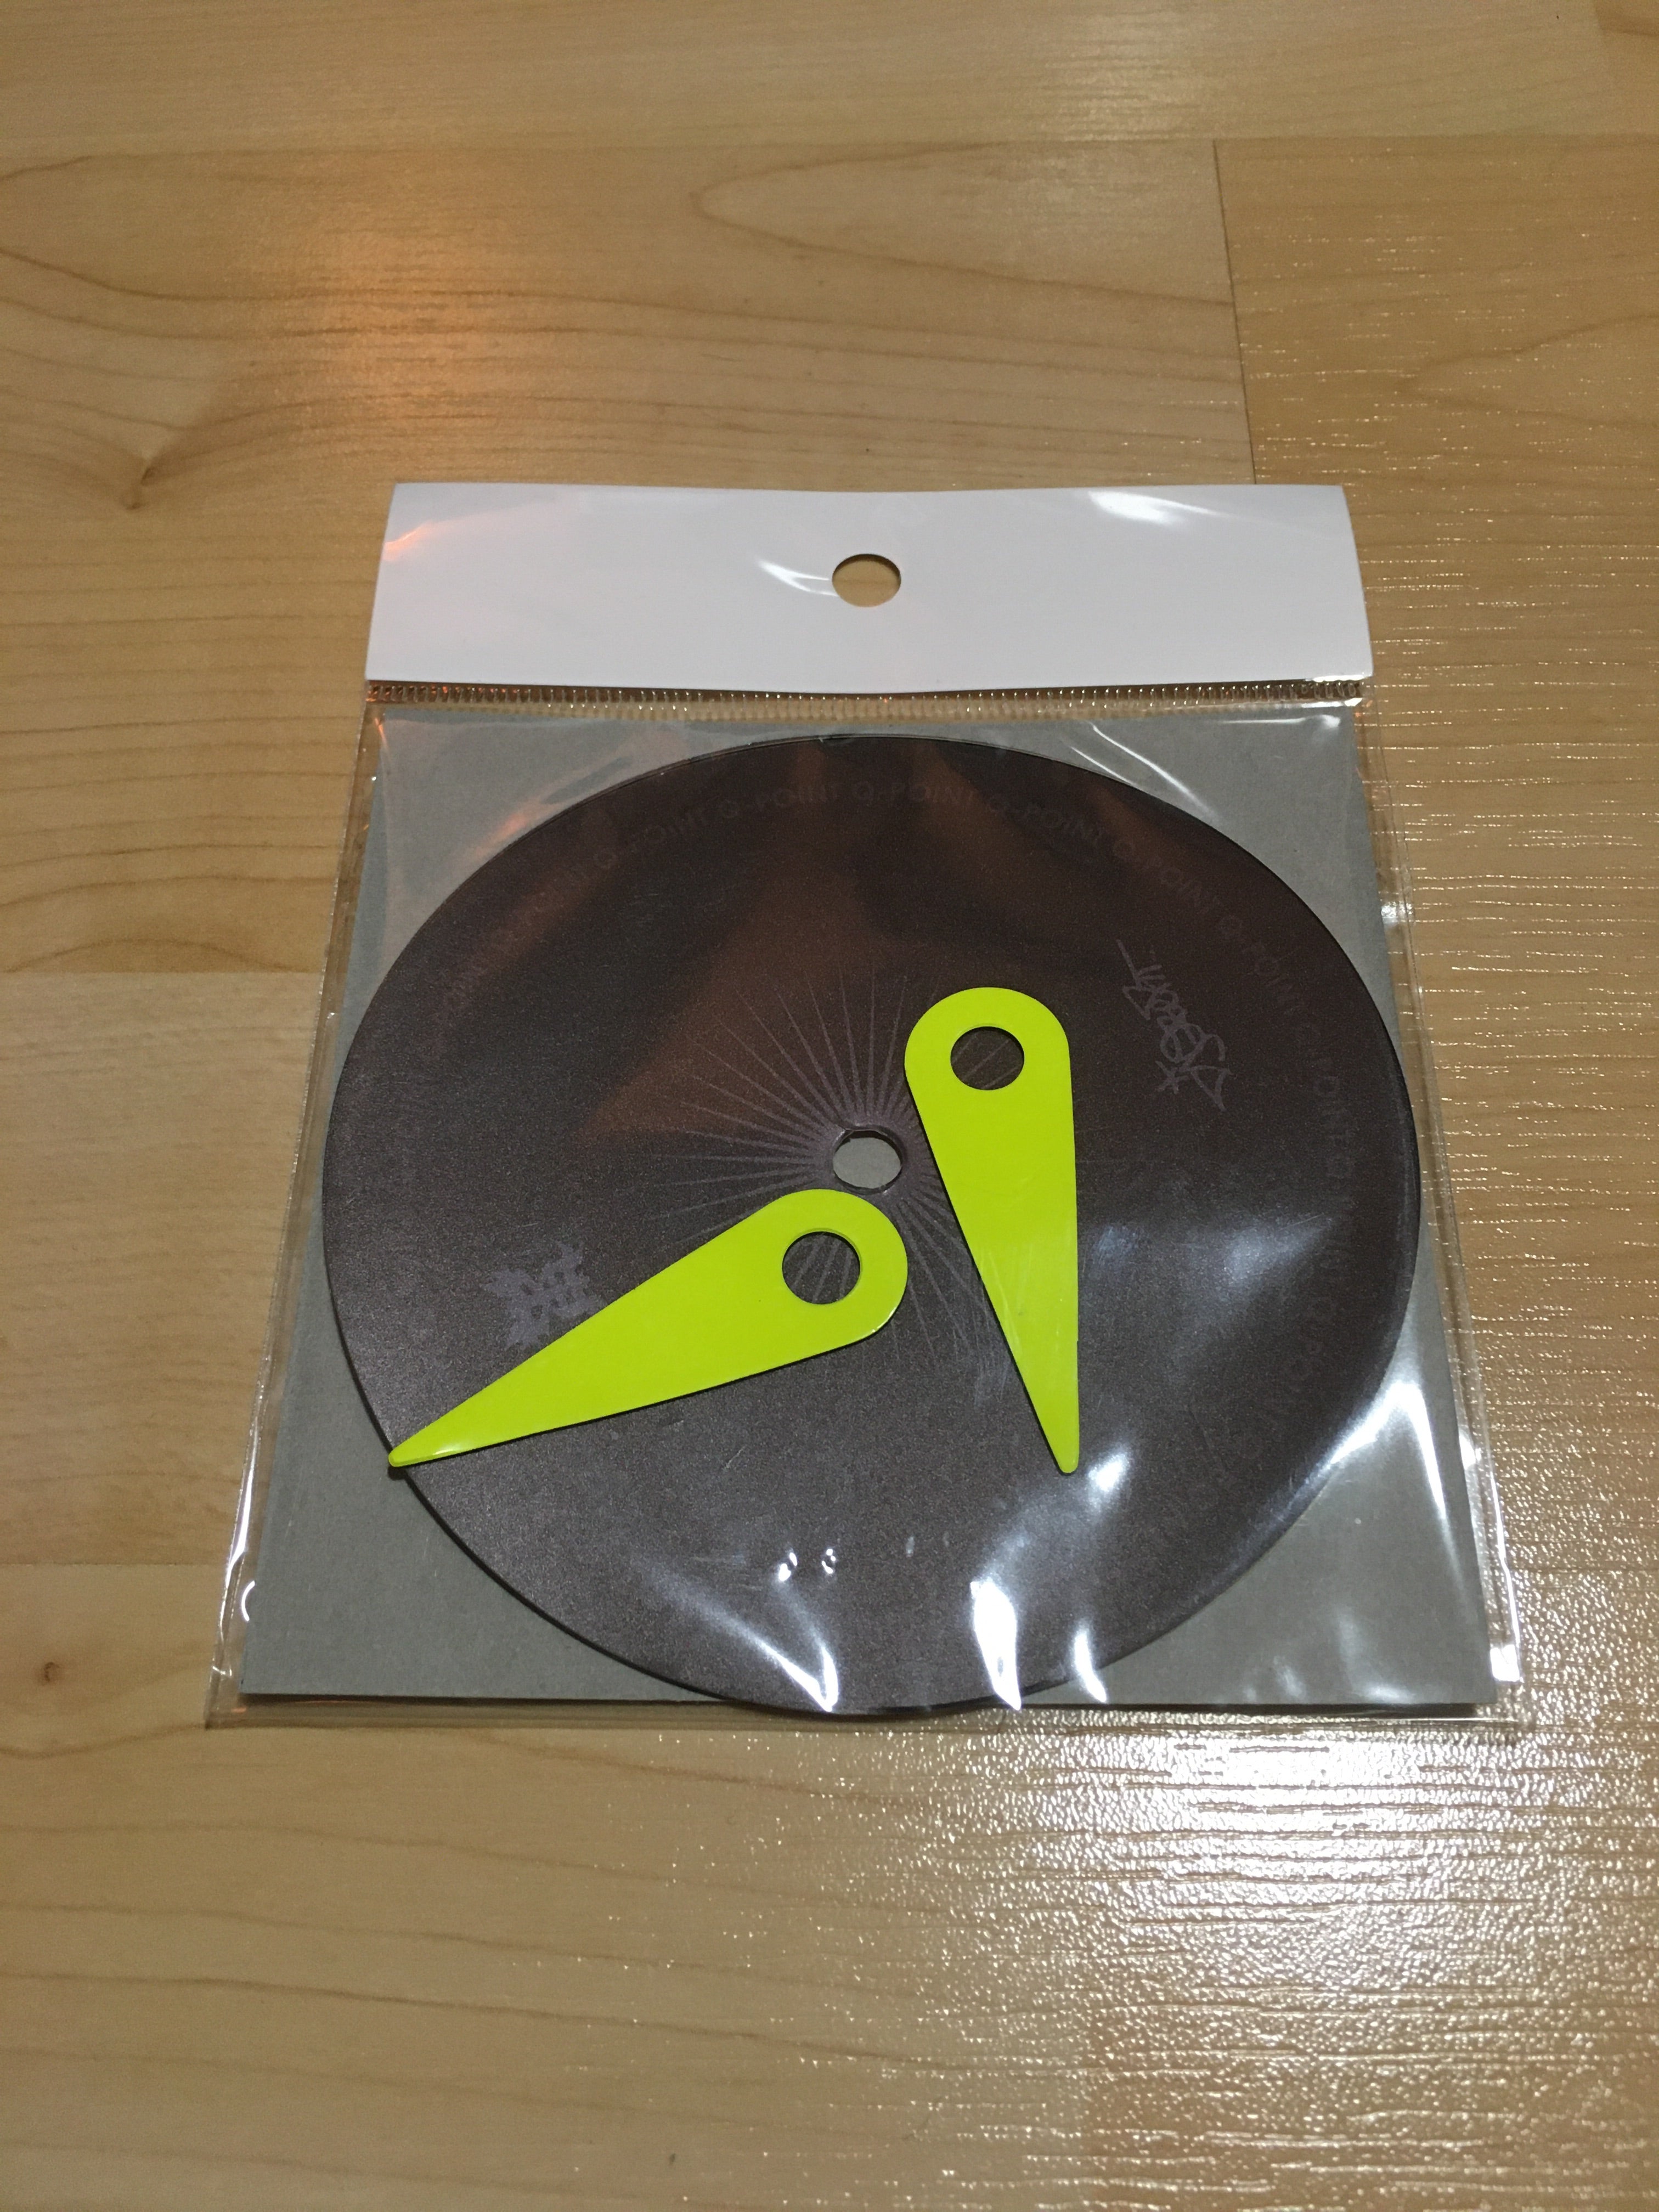 Q-Point Magnetic record label marker!